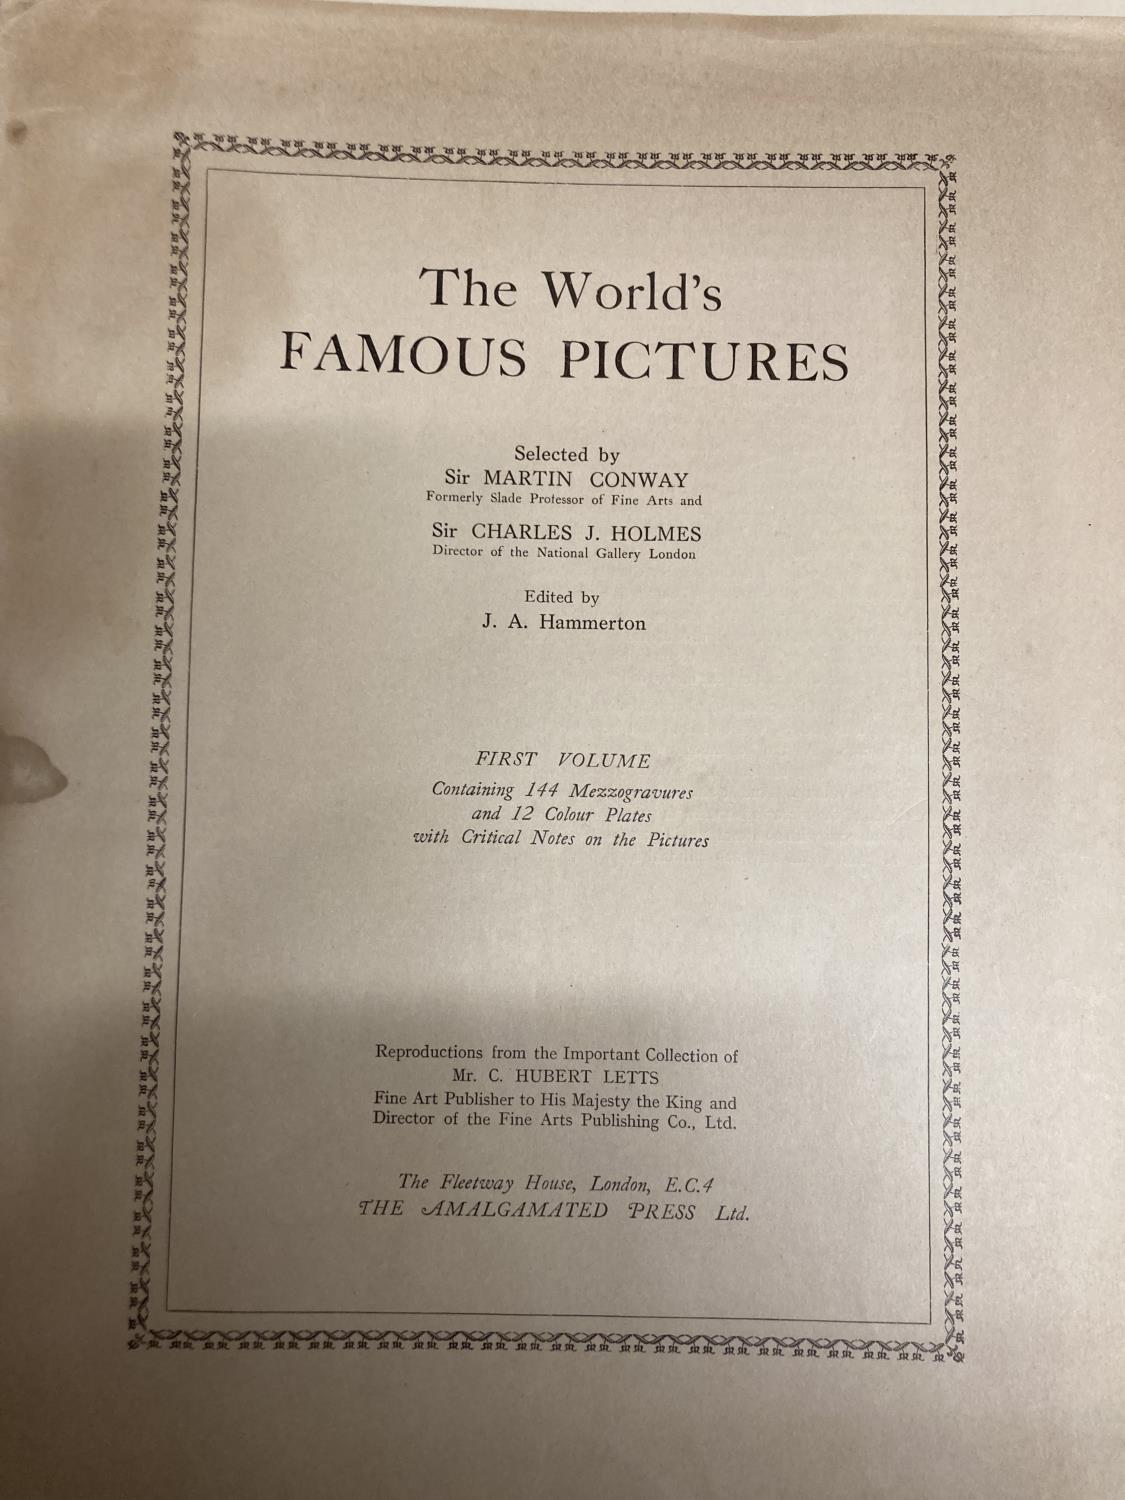 TWO HARDBACK COPIES OF 'THE WORLD'S FAMOUS PICTURES' OLD AND MODERN MASTERS - VOLUME 1 AND 2 - Image 2 of 3